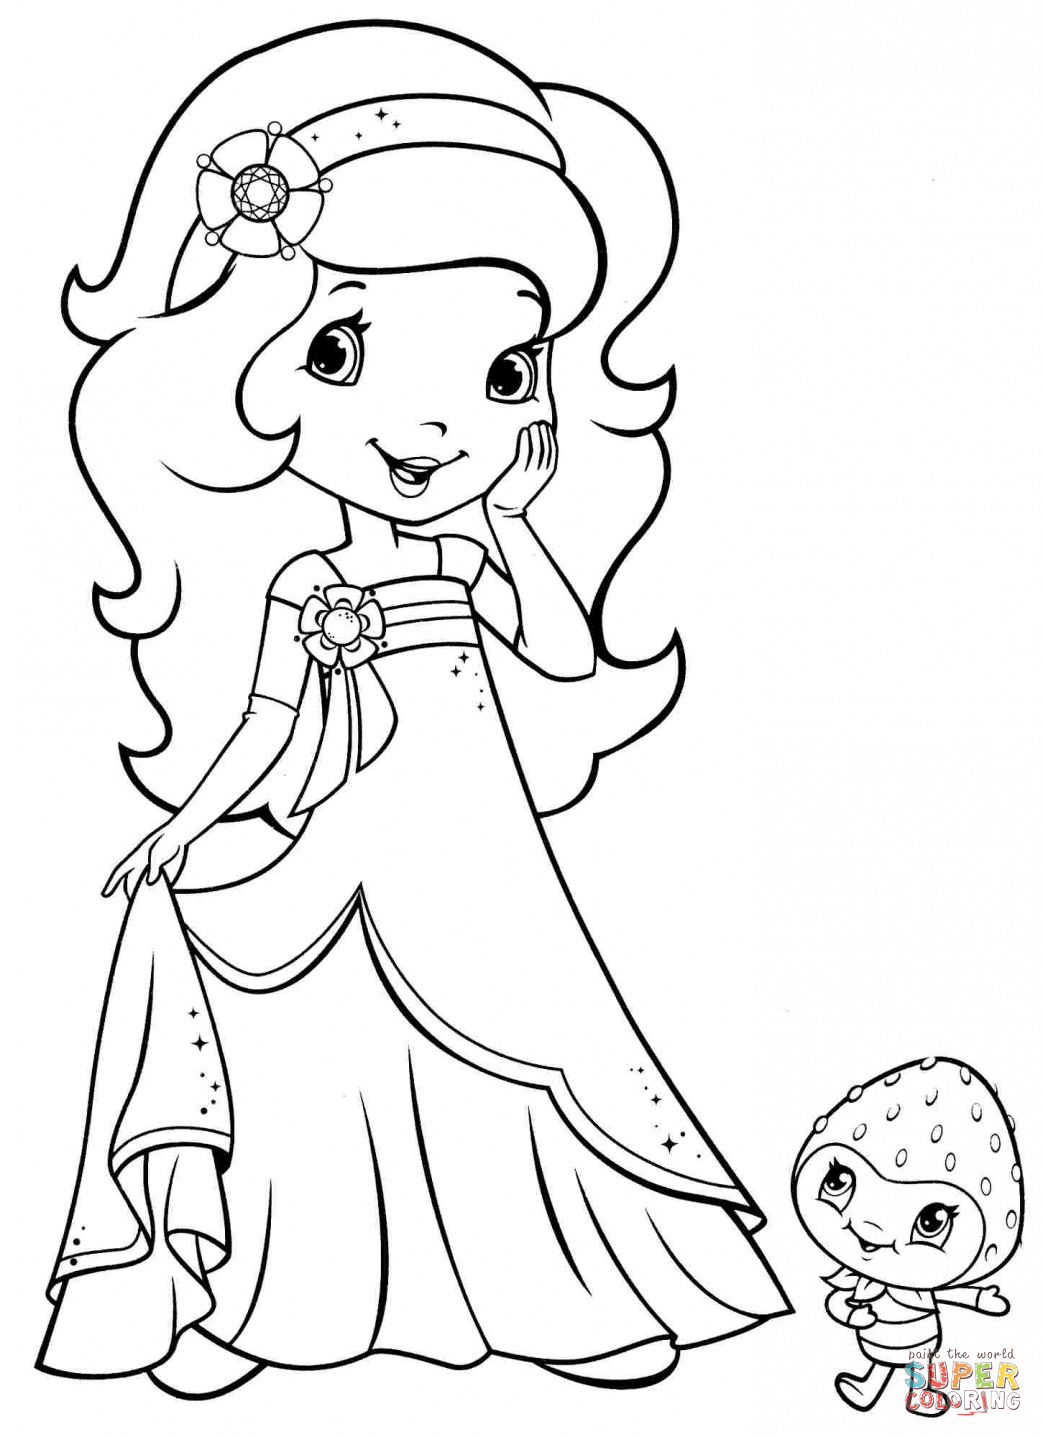 Color Orange Coloring Pages Orange Blossom And Berrykin Coloring Page Free Printable Coloring